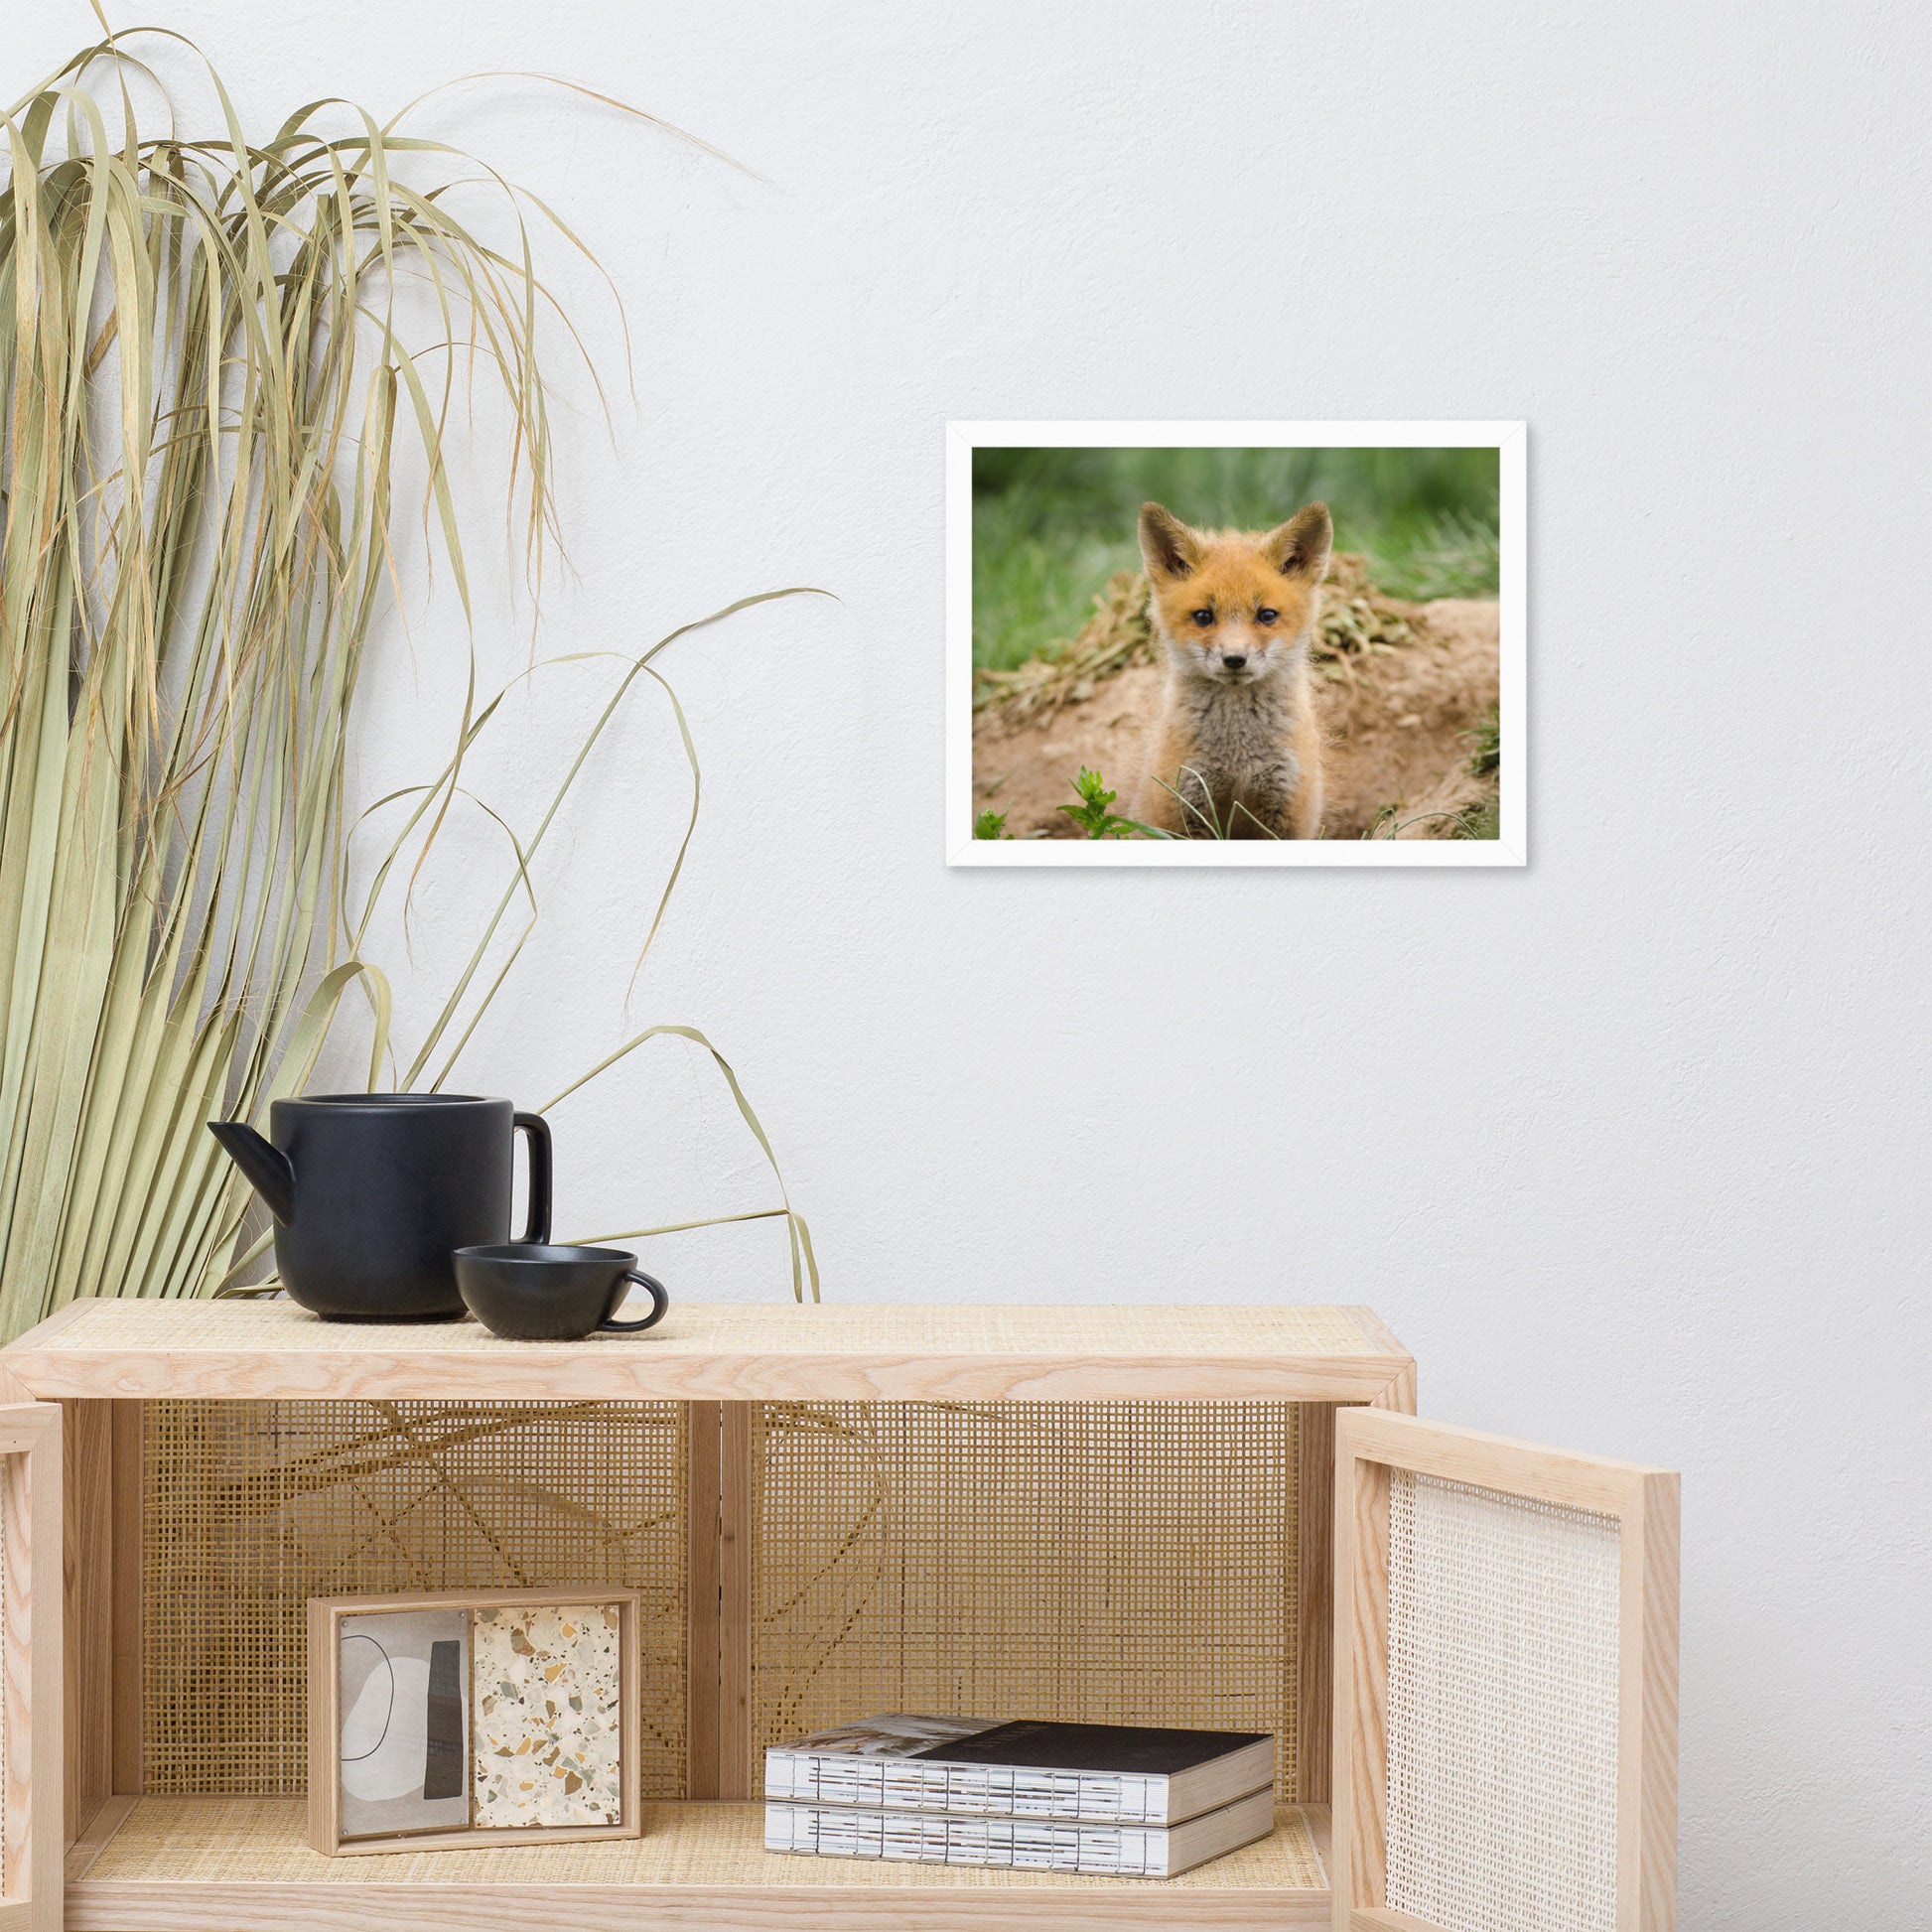 Unique Bathroom Pictures: Baby Young Red Fox Kit/ Animal / Wildlife / Nature Photographic Artwork - Framed Artwork - Wall Decor